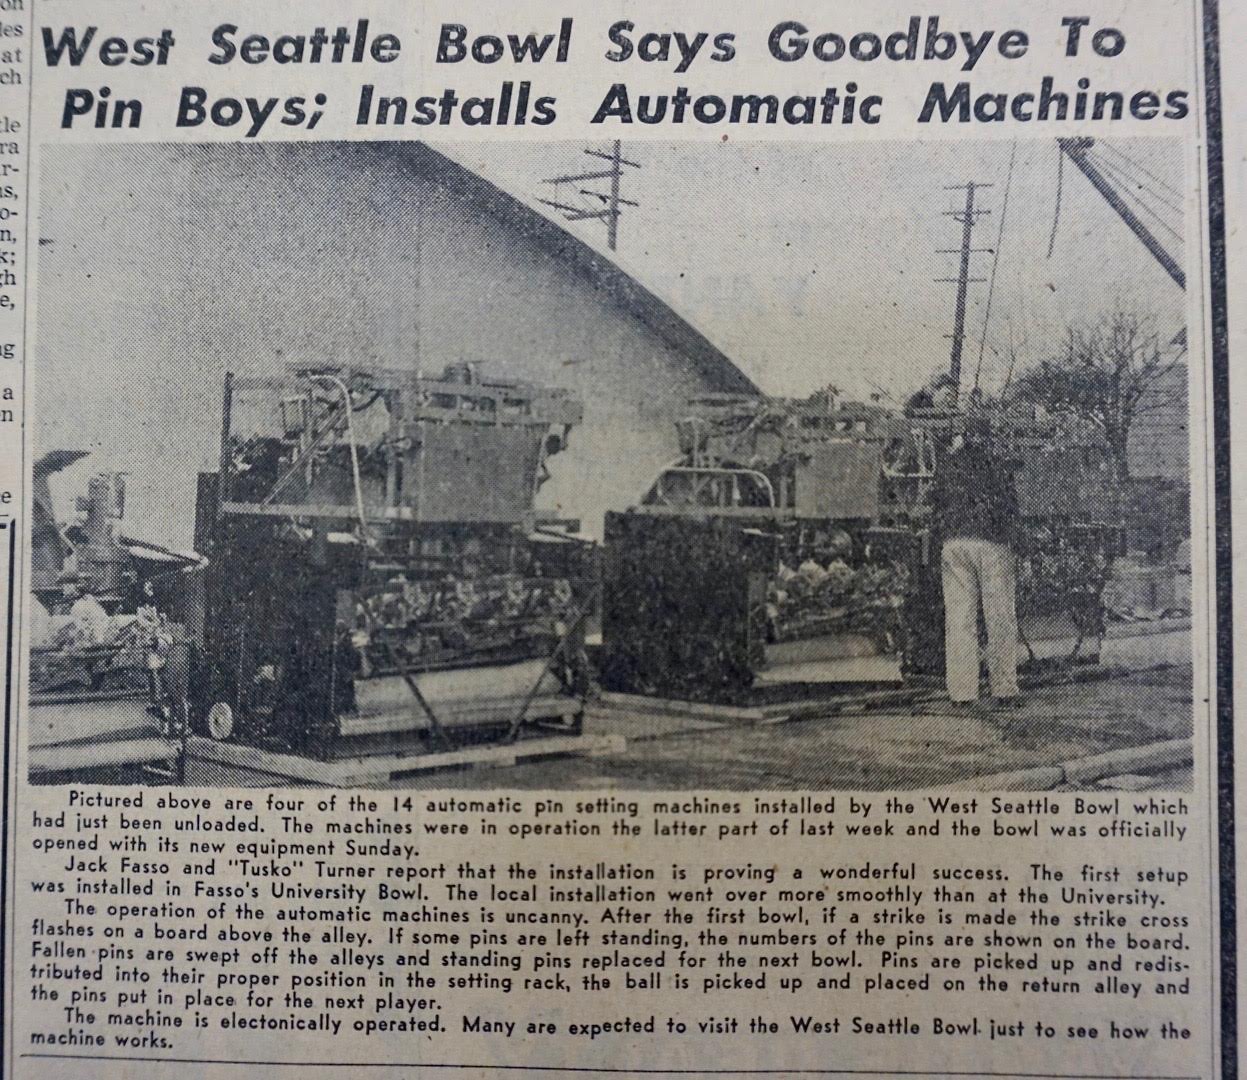 A West Seattle Bowl story from our archives